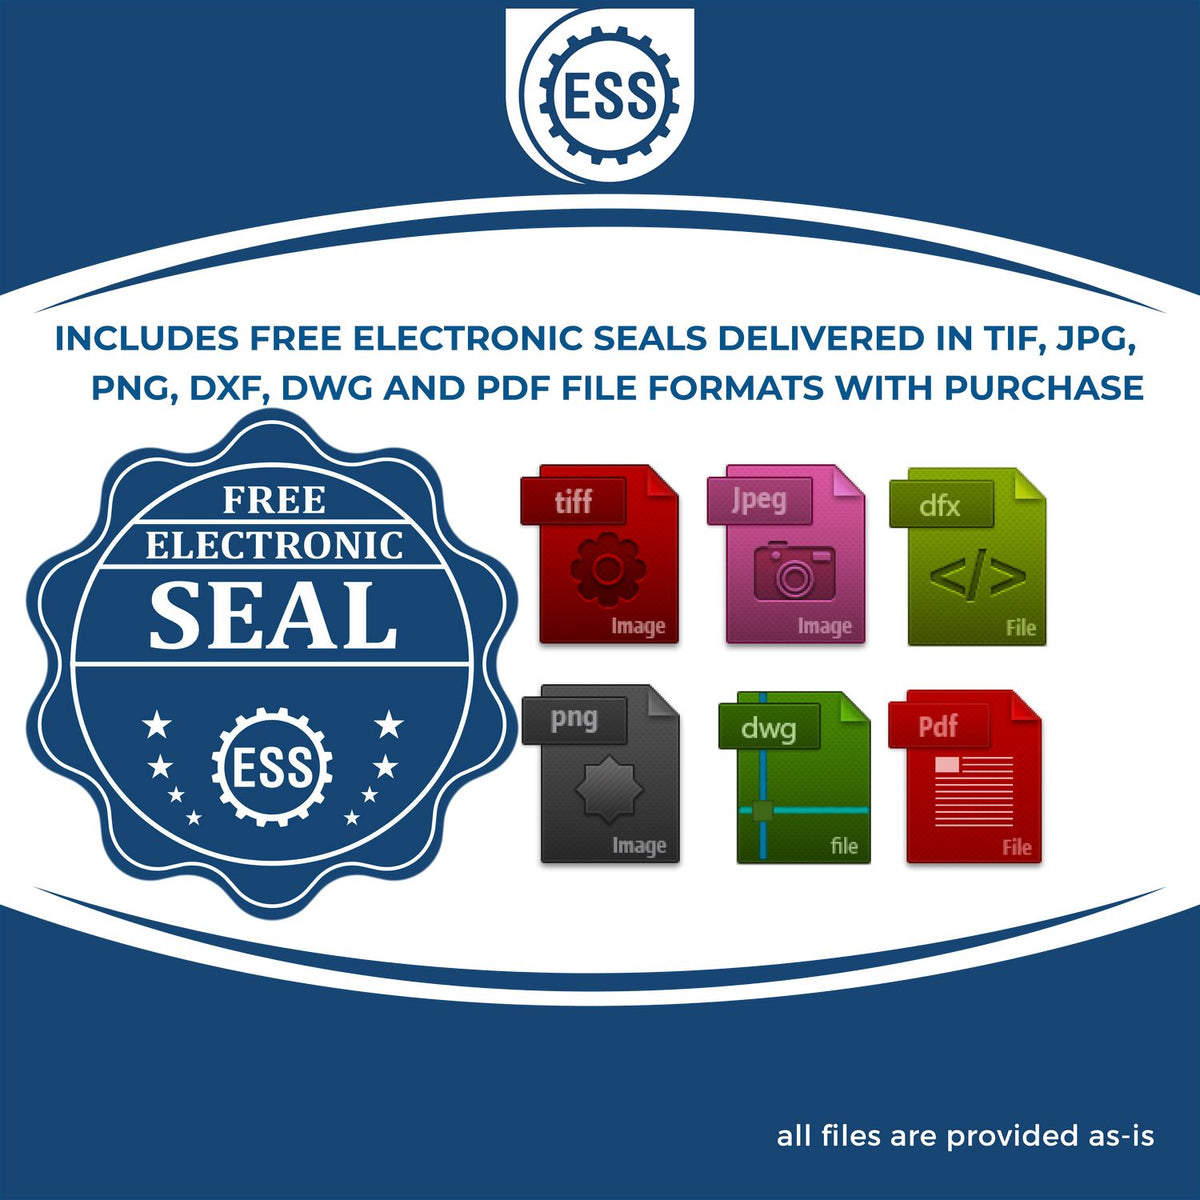 An infographic for the free electronic seal for the Gift Kentucky Landscape Architect Seal illustrating the different file type icons such as DXF, DWG, TIF, JPG and PNG.